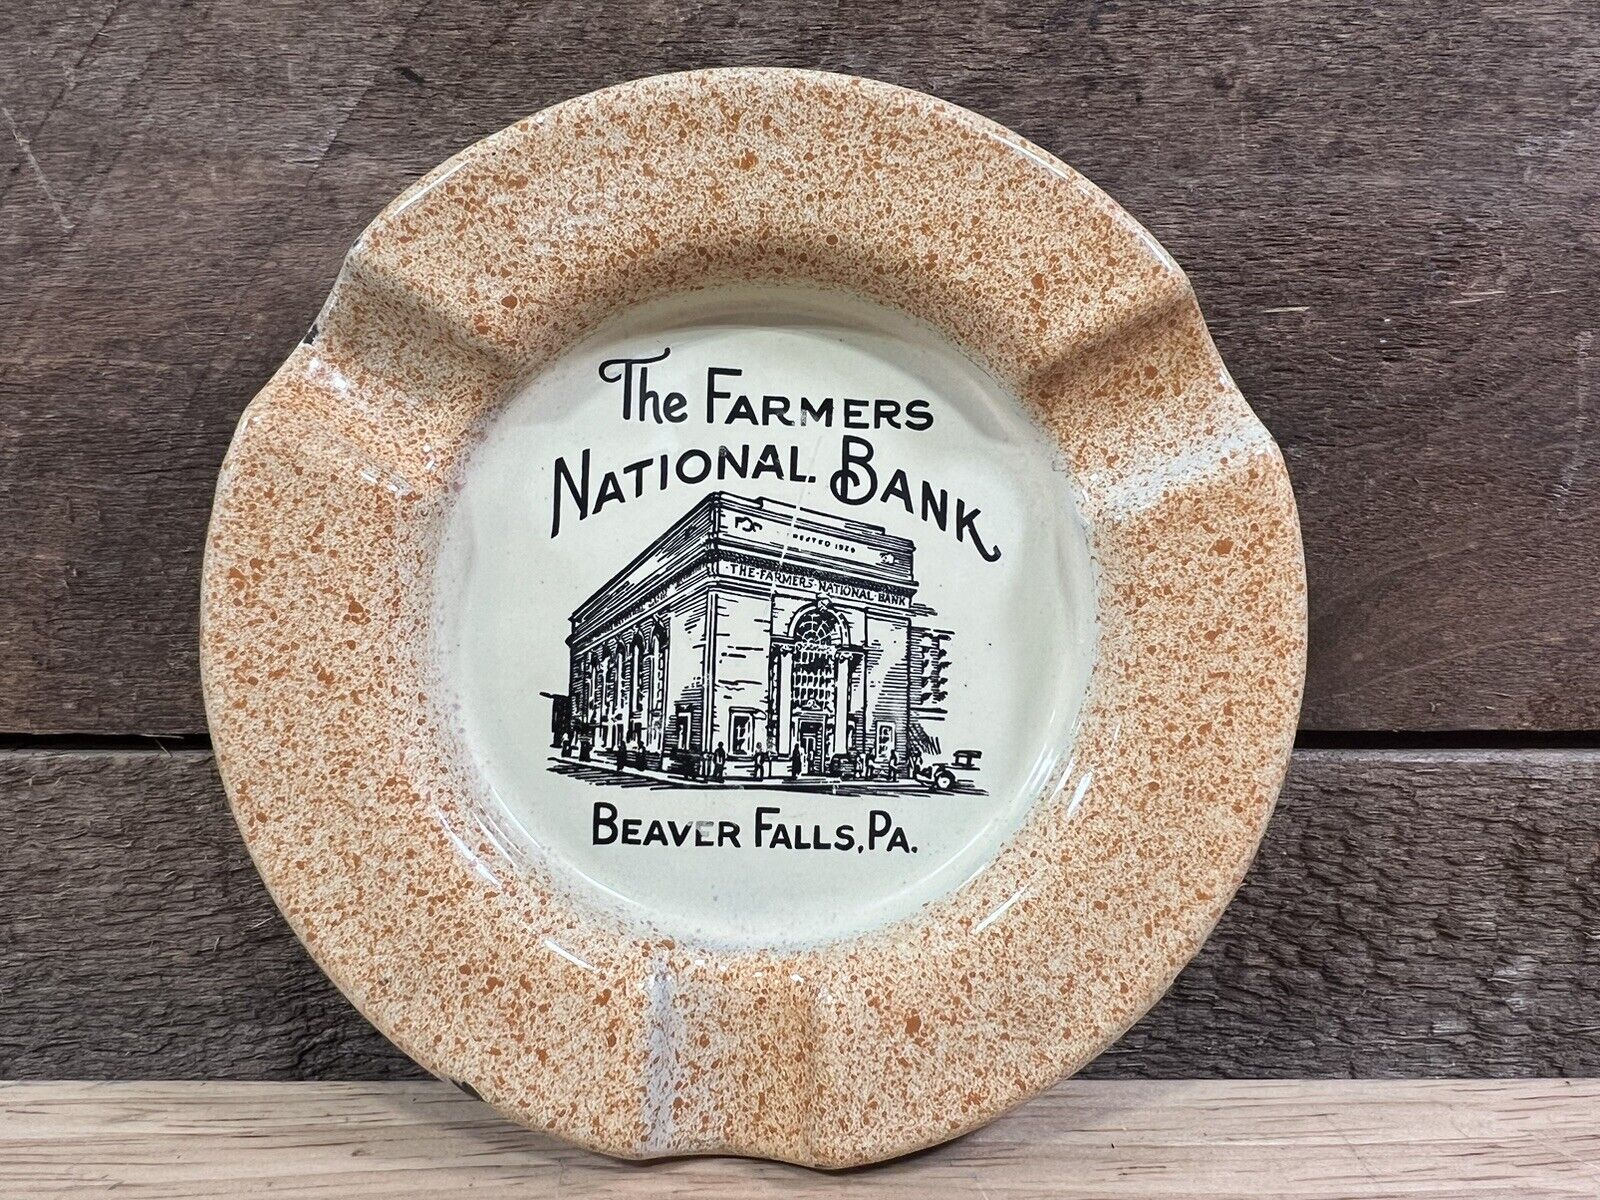 Antique ING-RICH Porcelain “The Farmers National Bank” Ashtray Beaver Falls, PA.